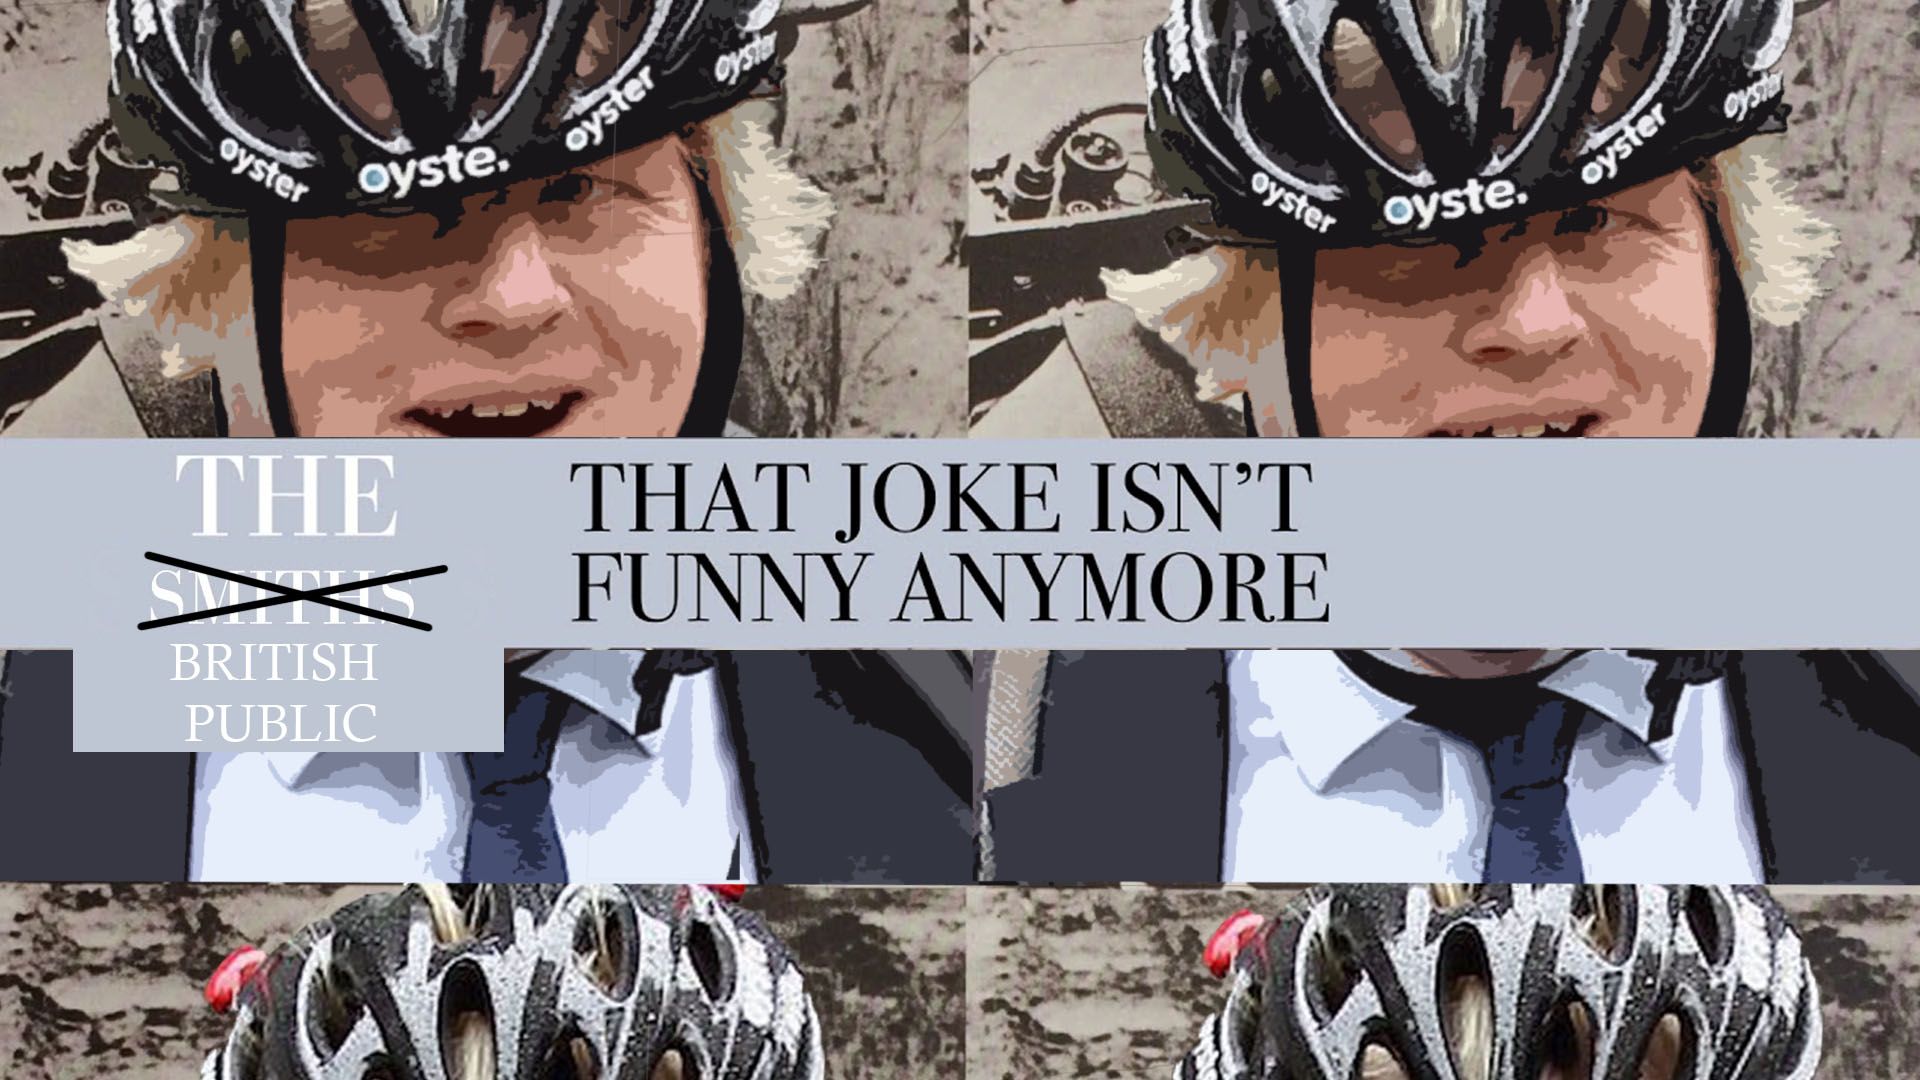 The photo shows The Smiths 'That Joke Isn't Funny Anymore' single cover, but 'The Smiths' is crossed out to read 'The British Public'. A picture of Boris Johnson in a cycle helmet is repeated in the background. Collage: Clementine Lawrence